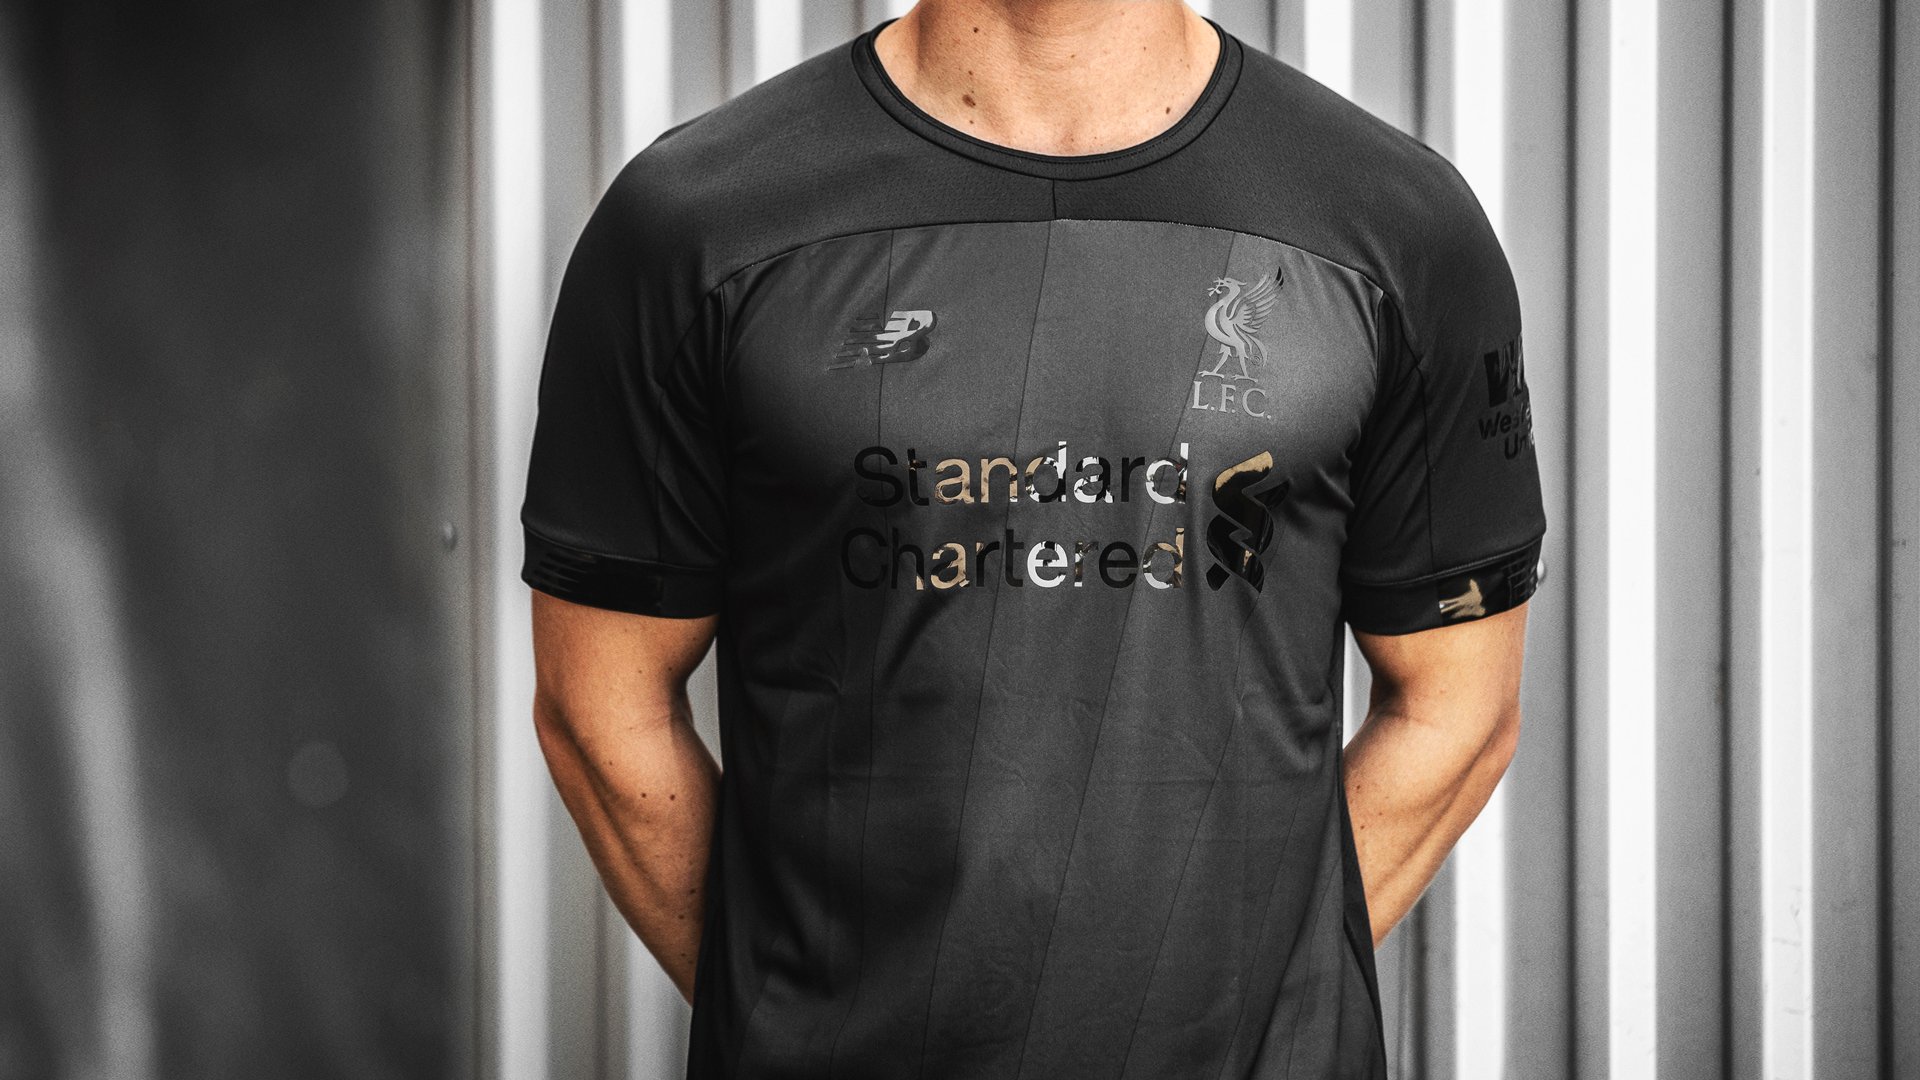 liverpool black and gold kit